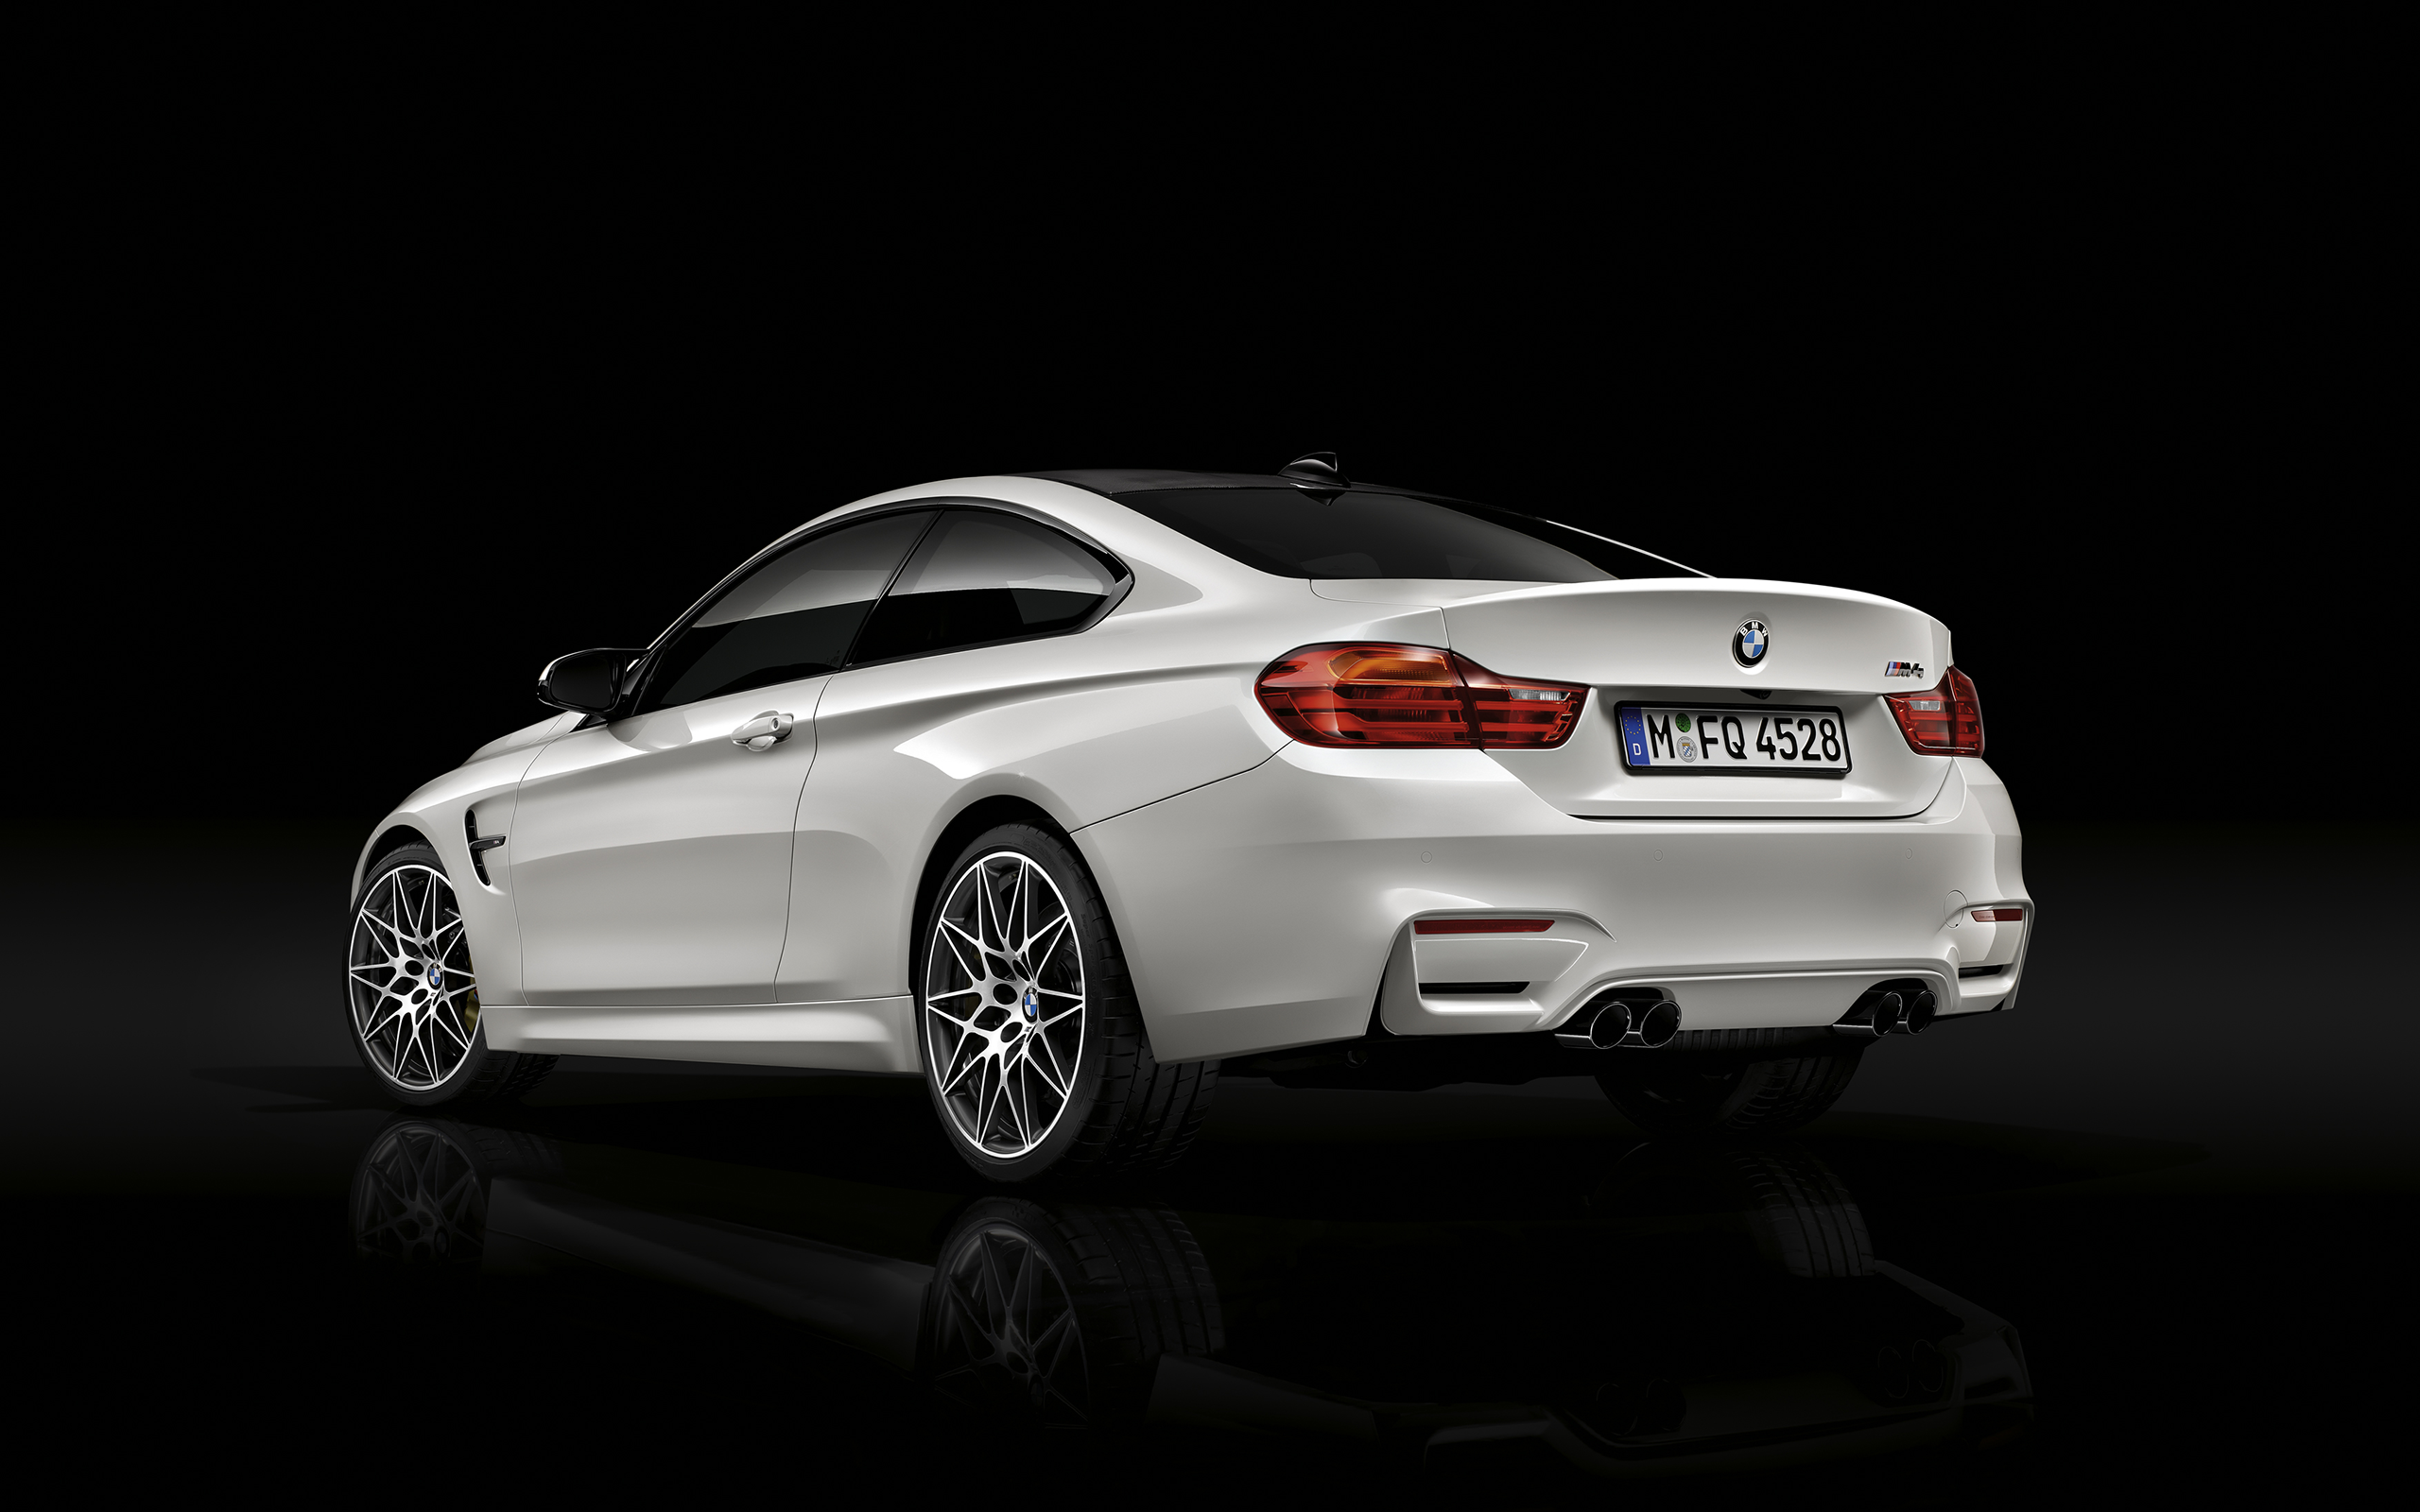 General 2560x1600 BMW M4 car vehicle reflection simple background BMW white cars black background numbers German cars